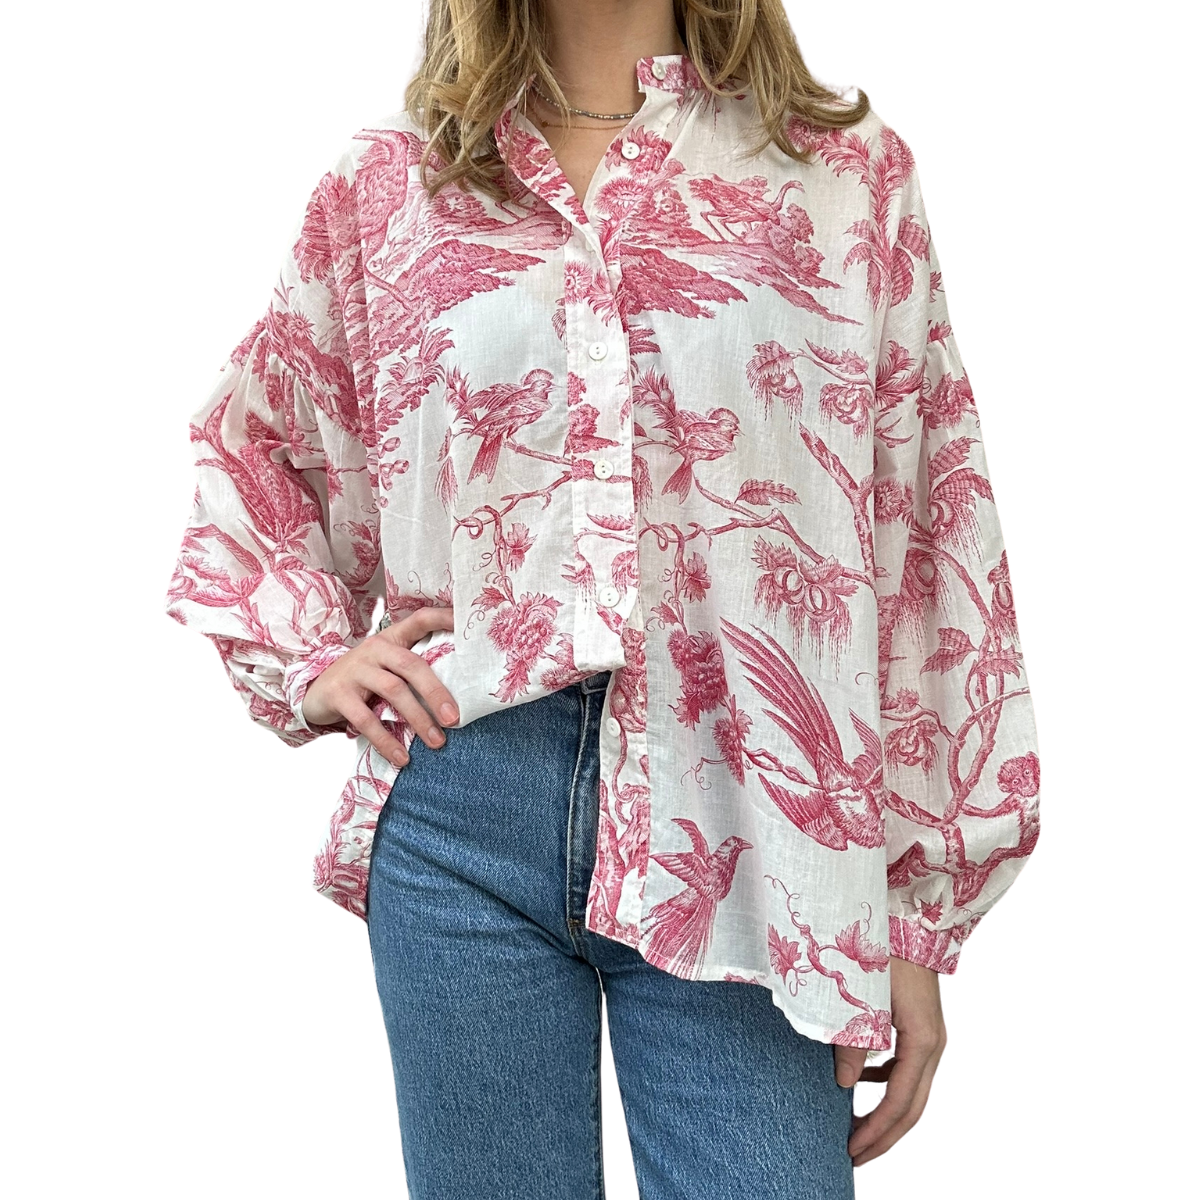 Claramonte Blouse - Delice Birds - (ink or pink)